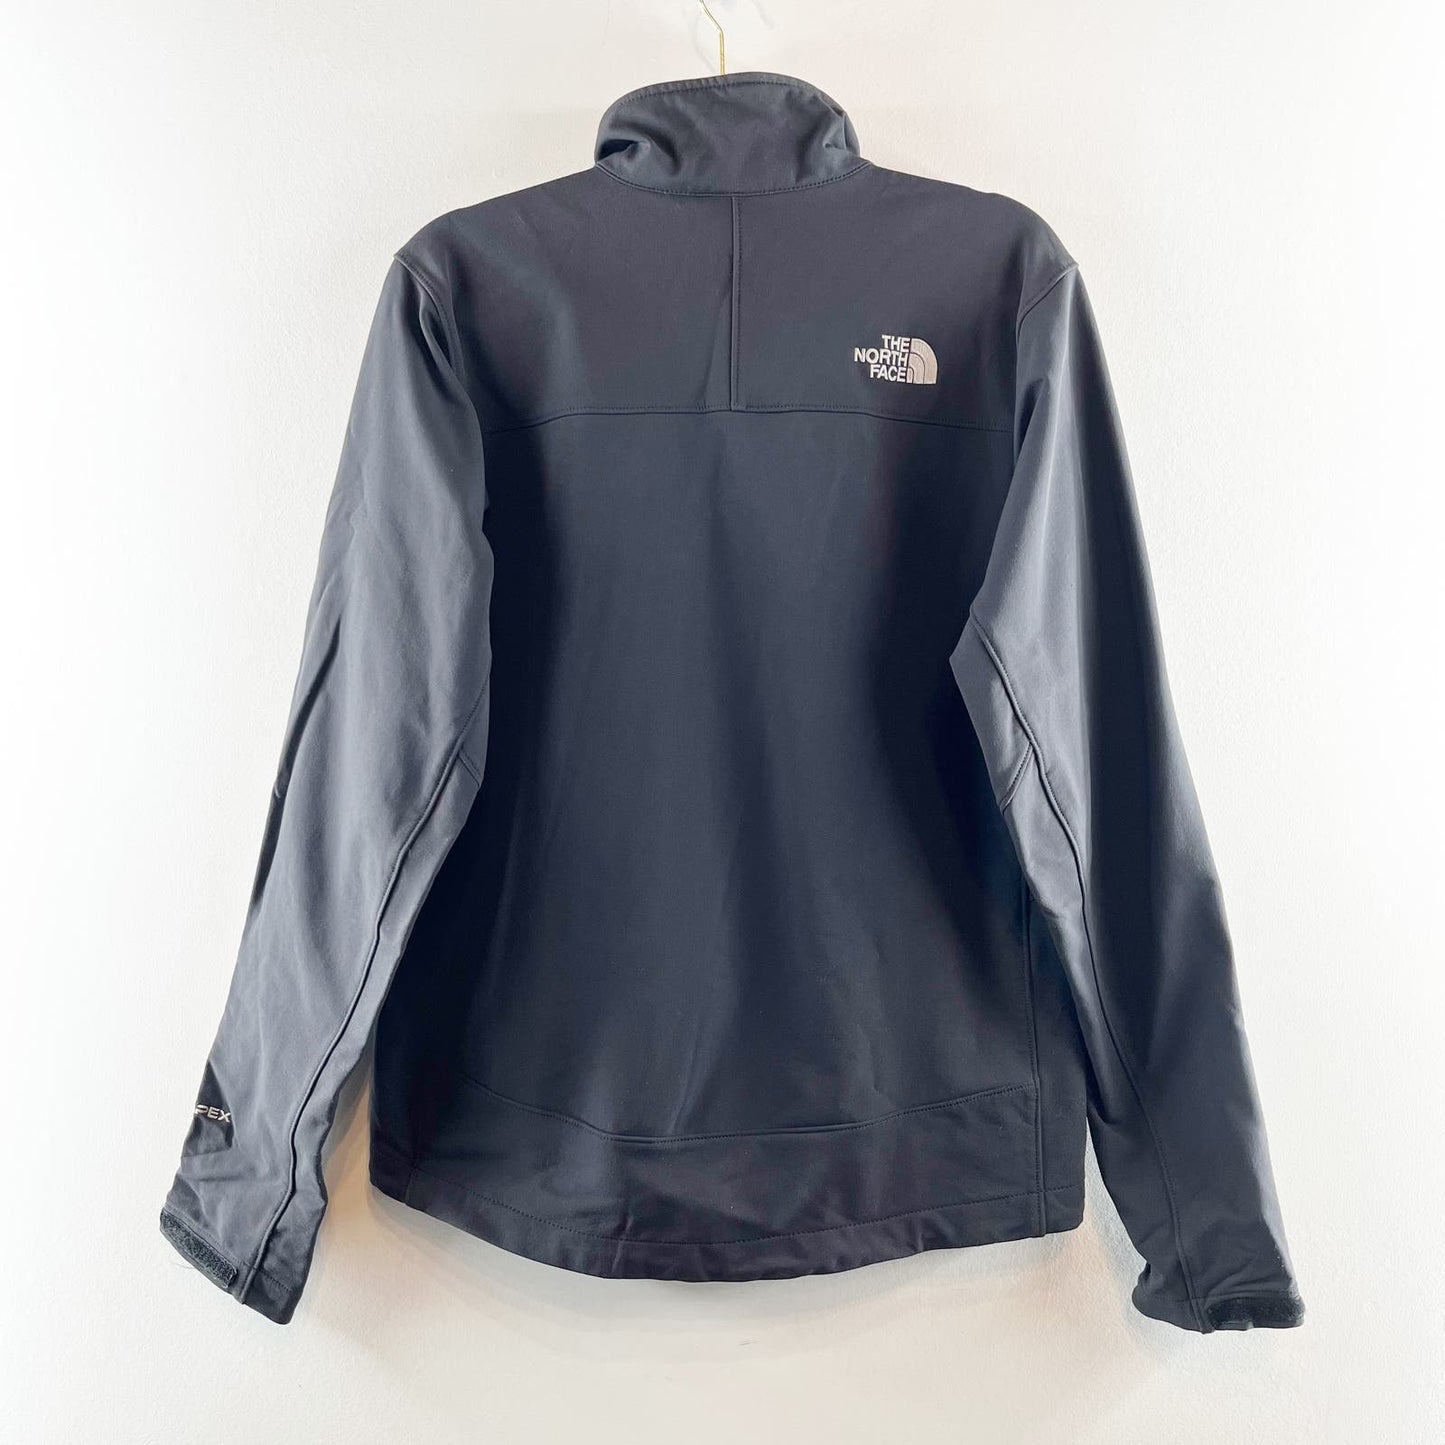 The North Face Apex Bionic Full Zip Jacket Black Small